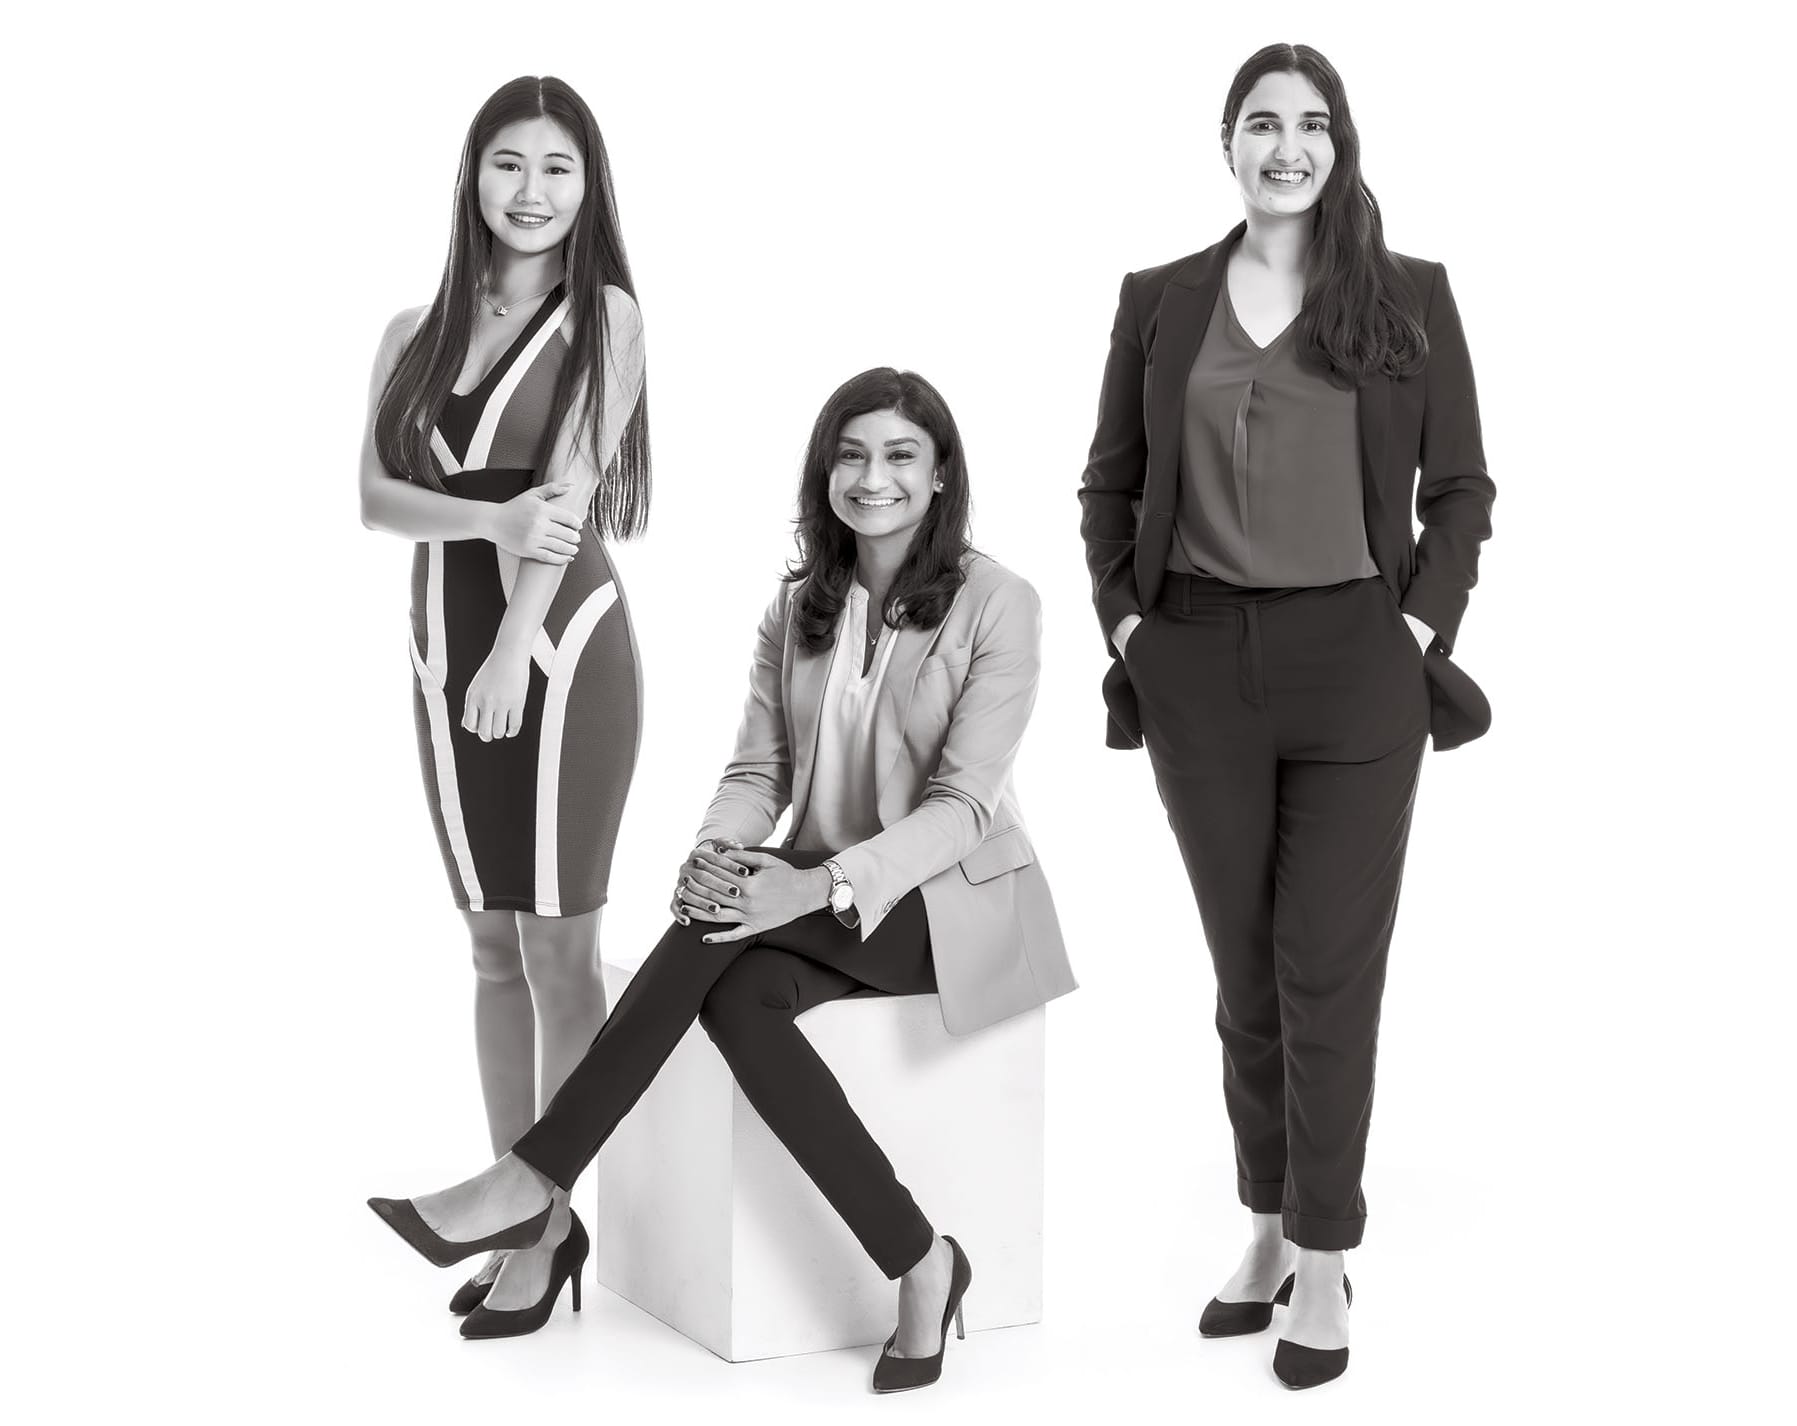 Three Wharton women pose together for a photo in formal business attire.